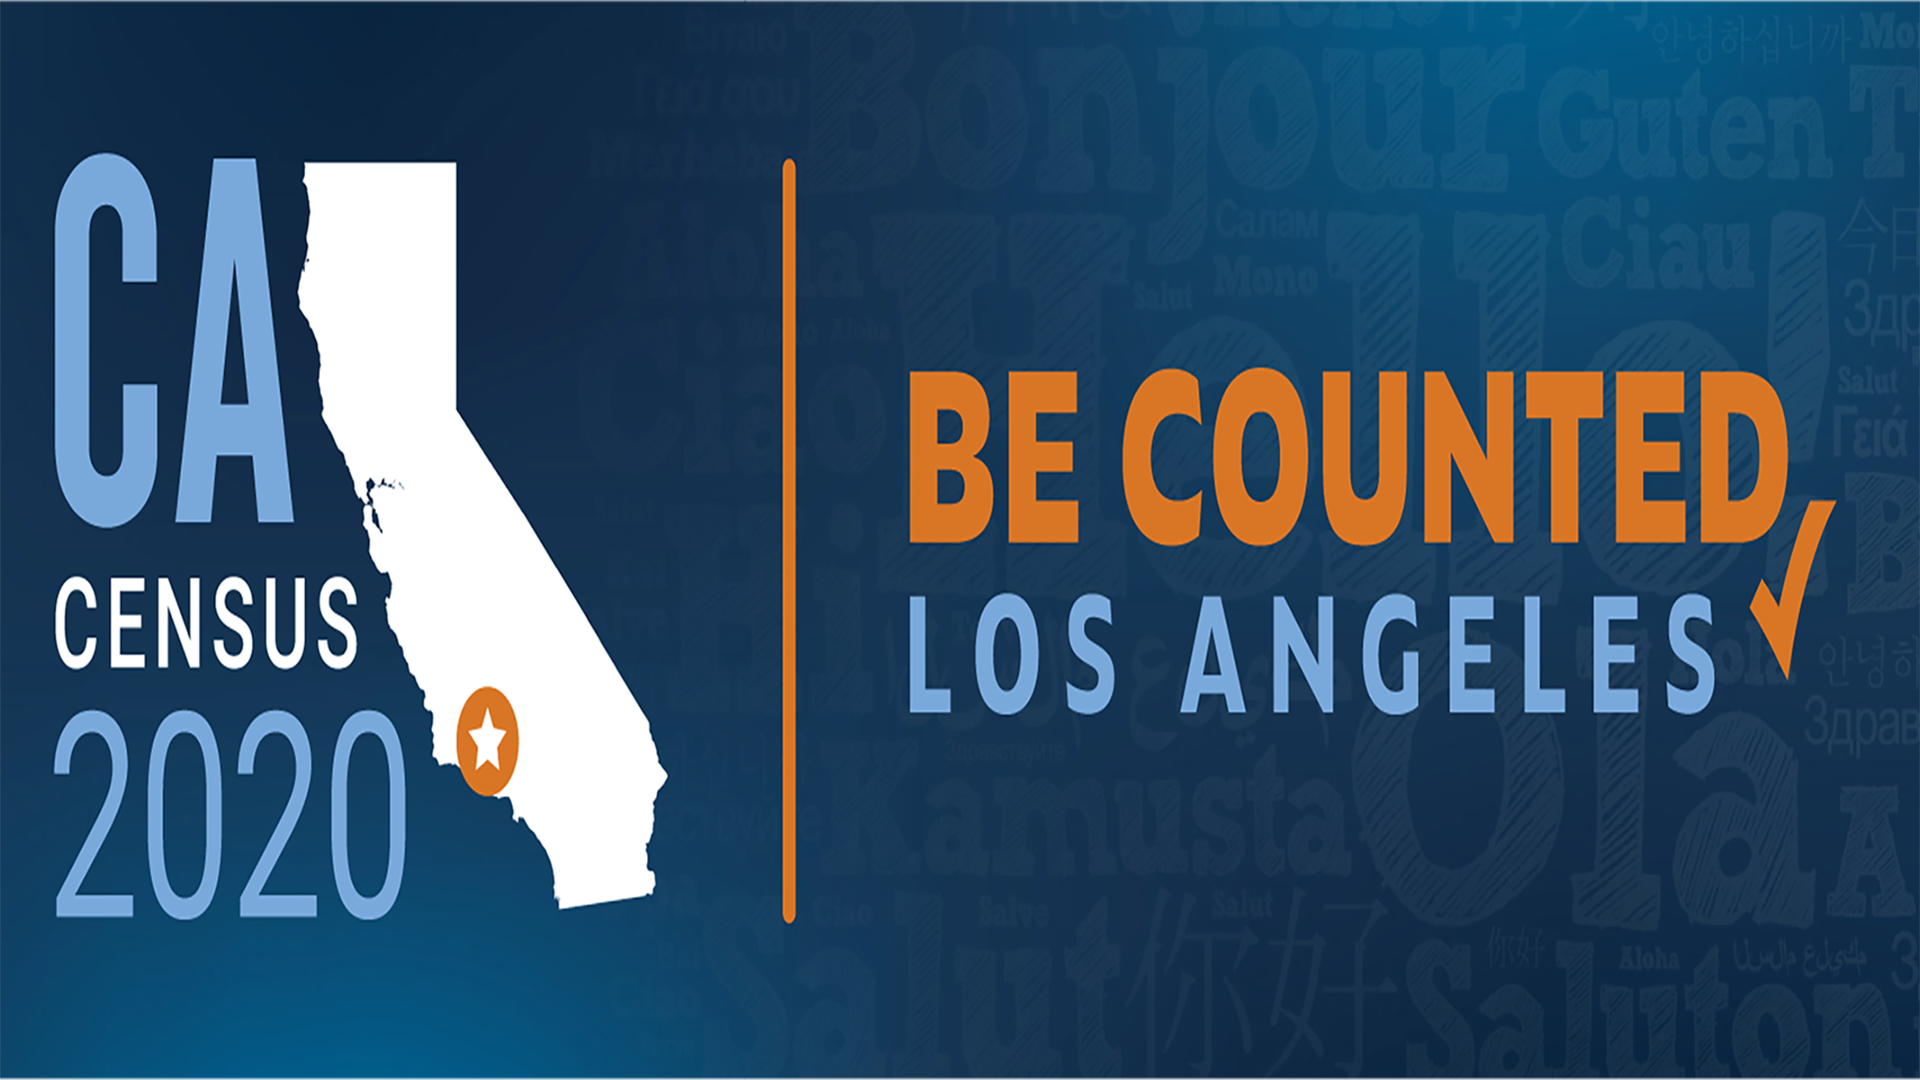 Banner of California Map Logo with text Census 2020 Be Counted Los Angeles.